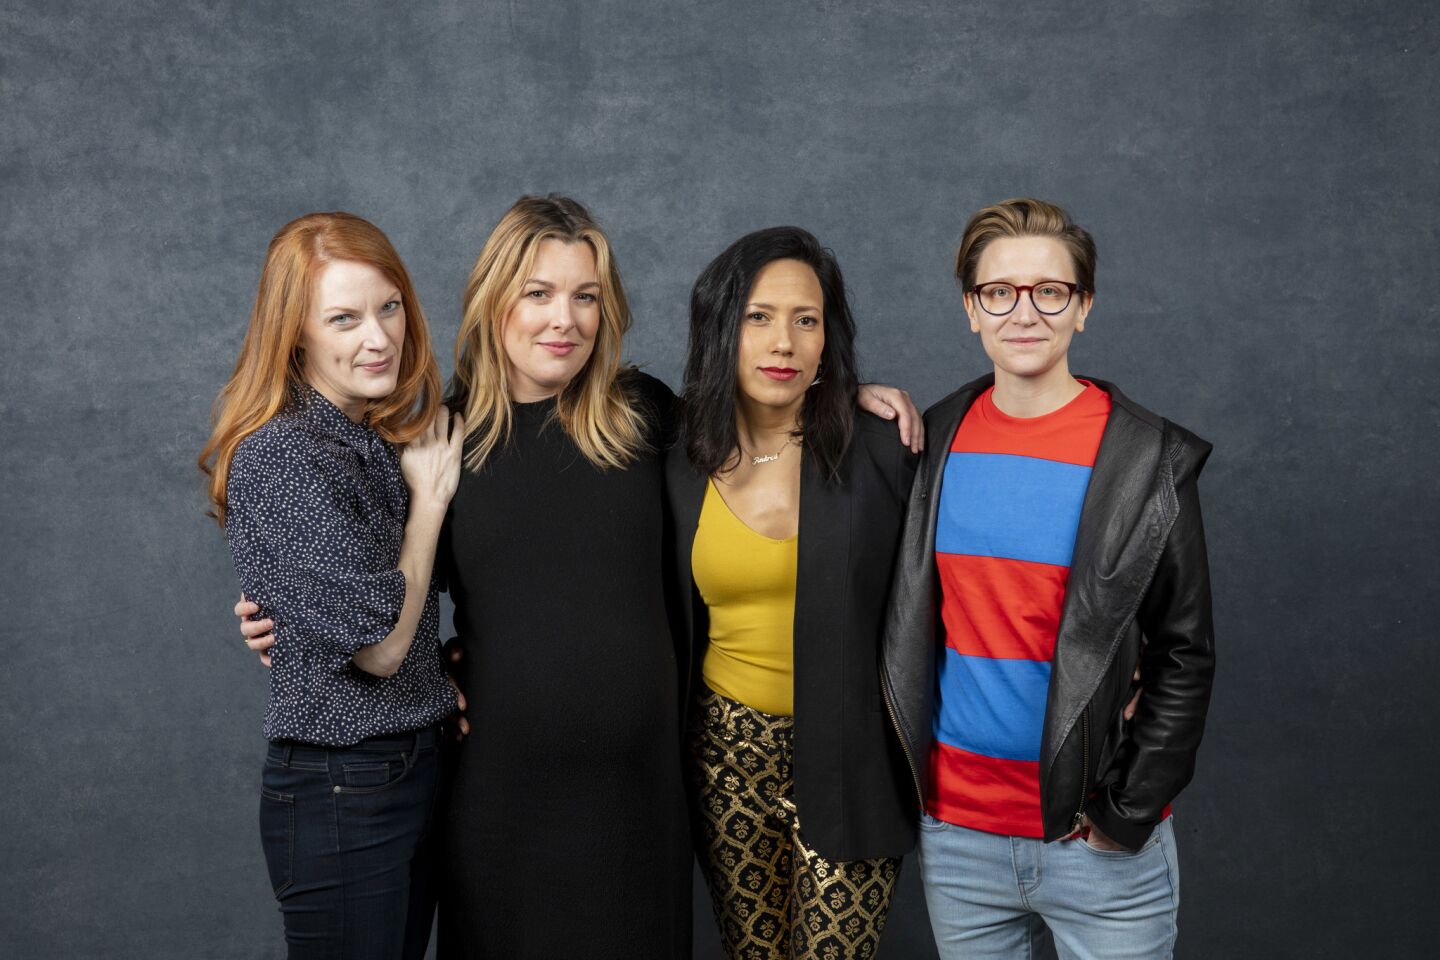 (L-R) - Director Samantha Buck, actor Anna Margaret Hollyman, actor Andrea Suarez-Paz, and director Marie Schlingmann, from the film, "Sister Aimee," photographed at the 2019 Sundance Film Festival, in Park City, Utah, United States on Friday, Jan. 25, 2019.